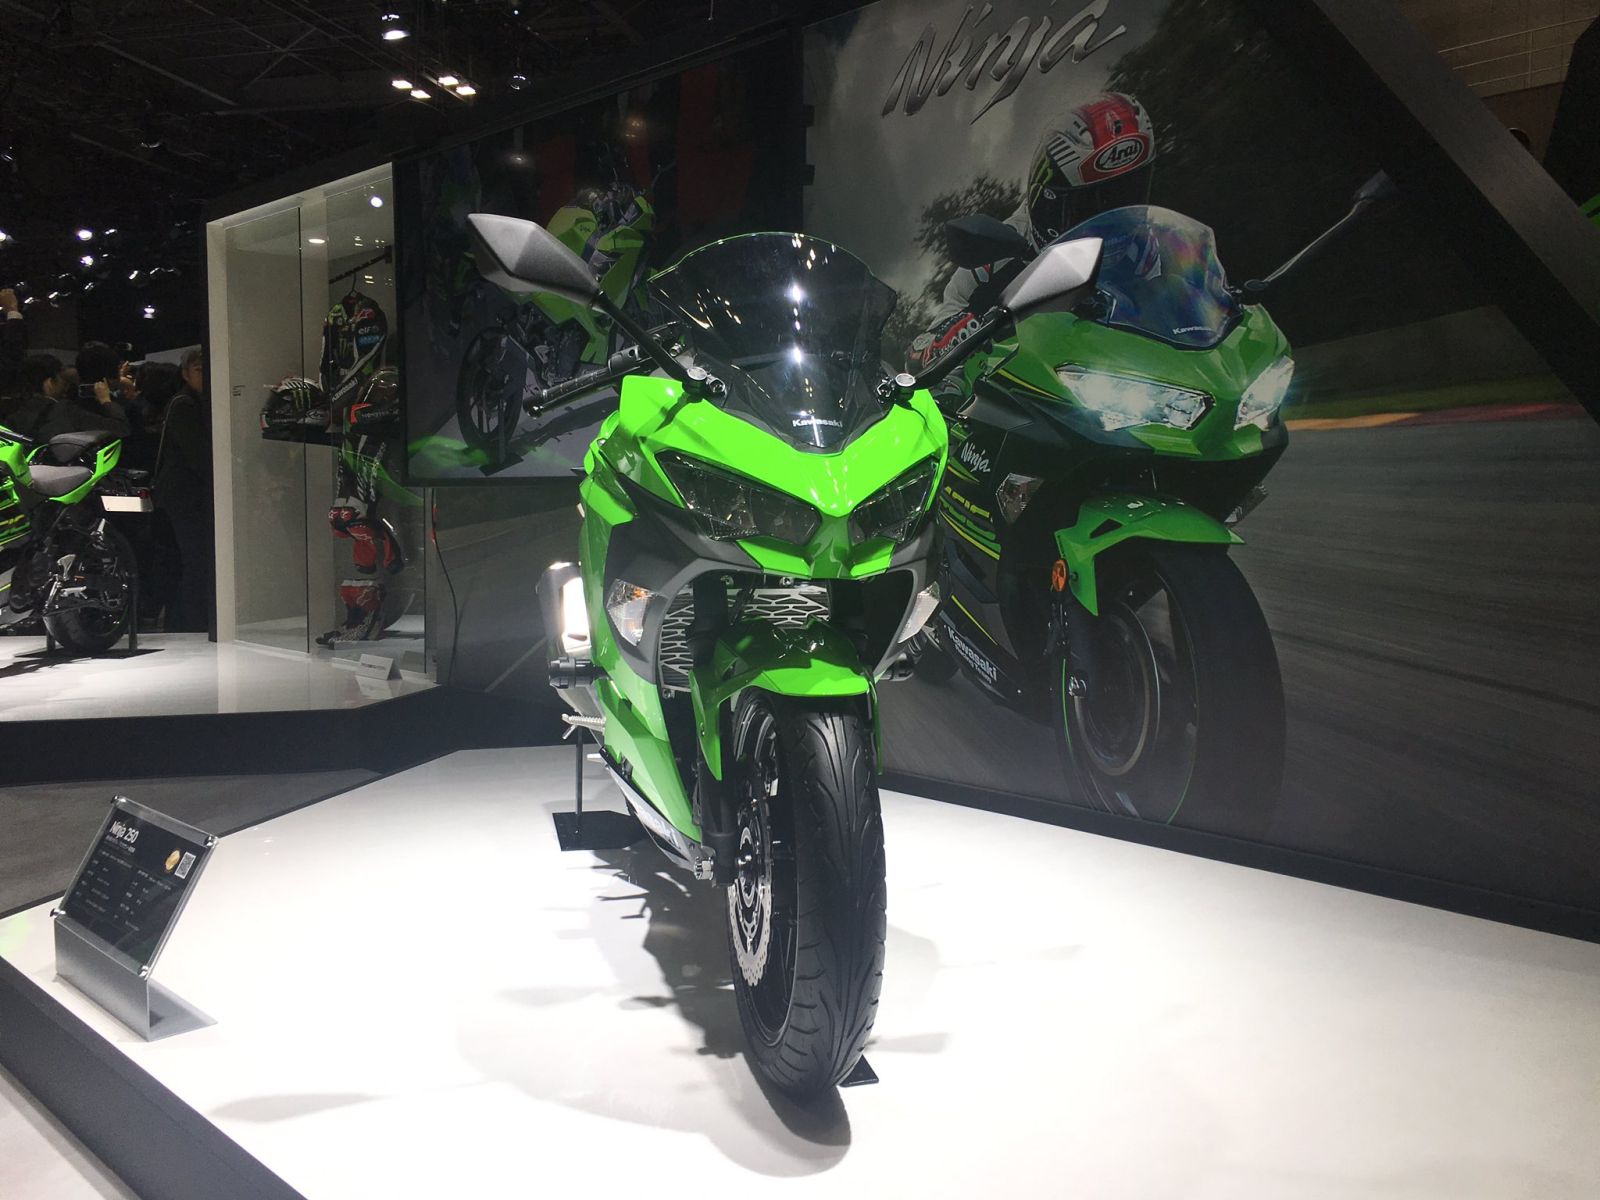 2018 Kawasaki Ninja Images, Features, Tech And All Need To Know | Motoroids